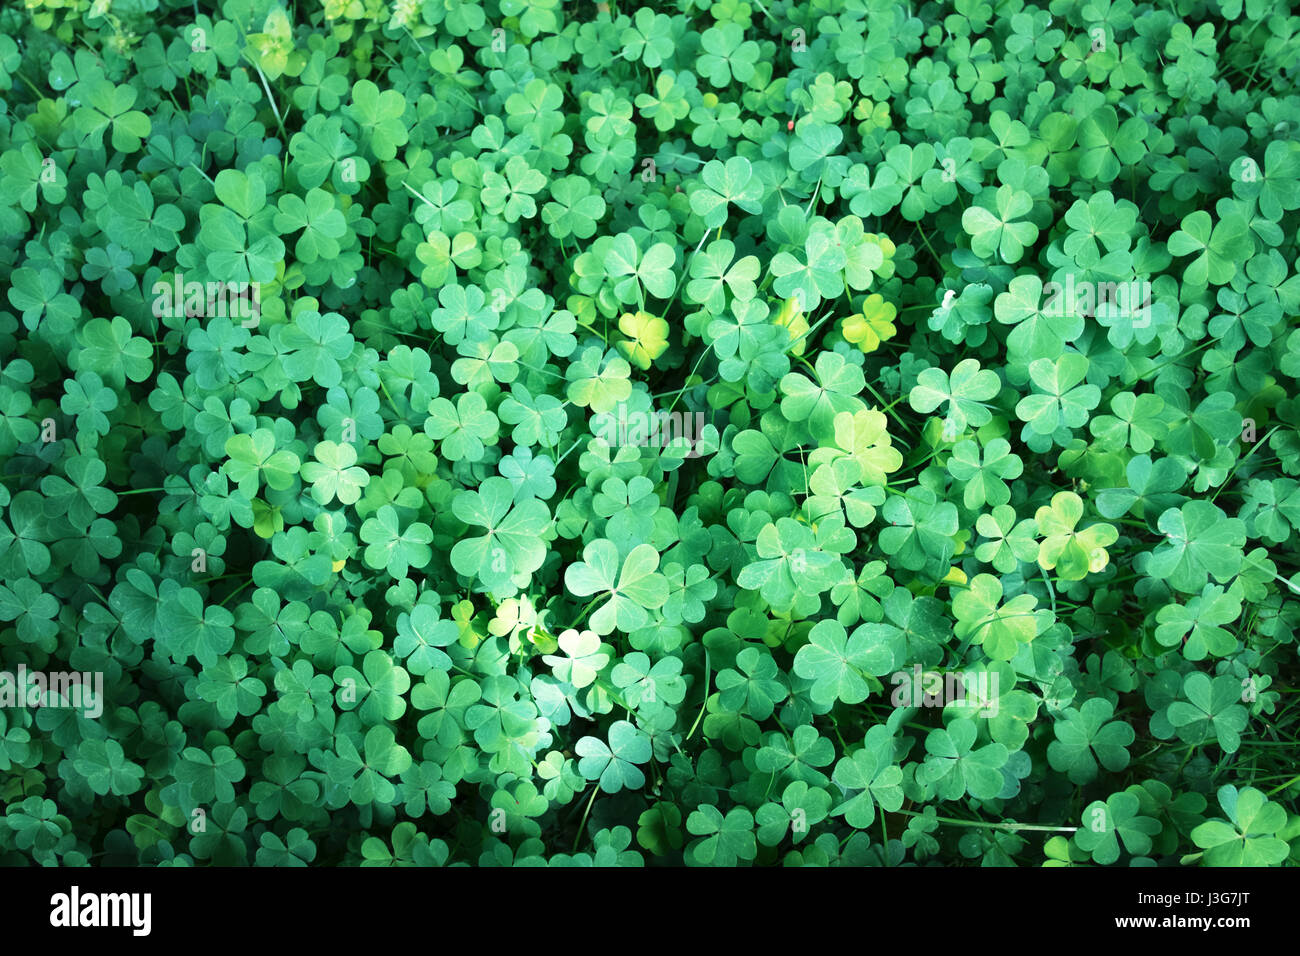 Green clover plant texture. Symbol of Saint Patrick holiday in Ireland. Can be used like background Stock Photo